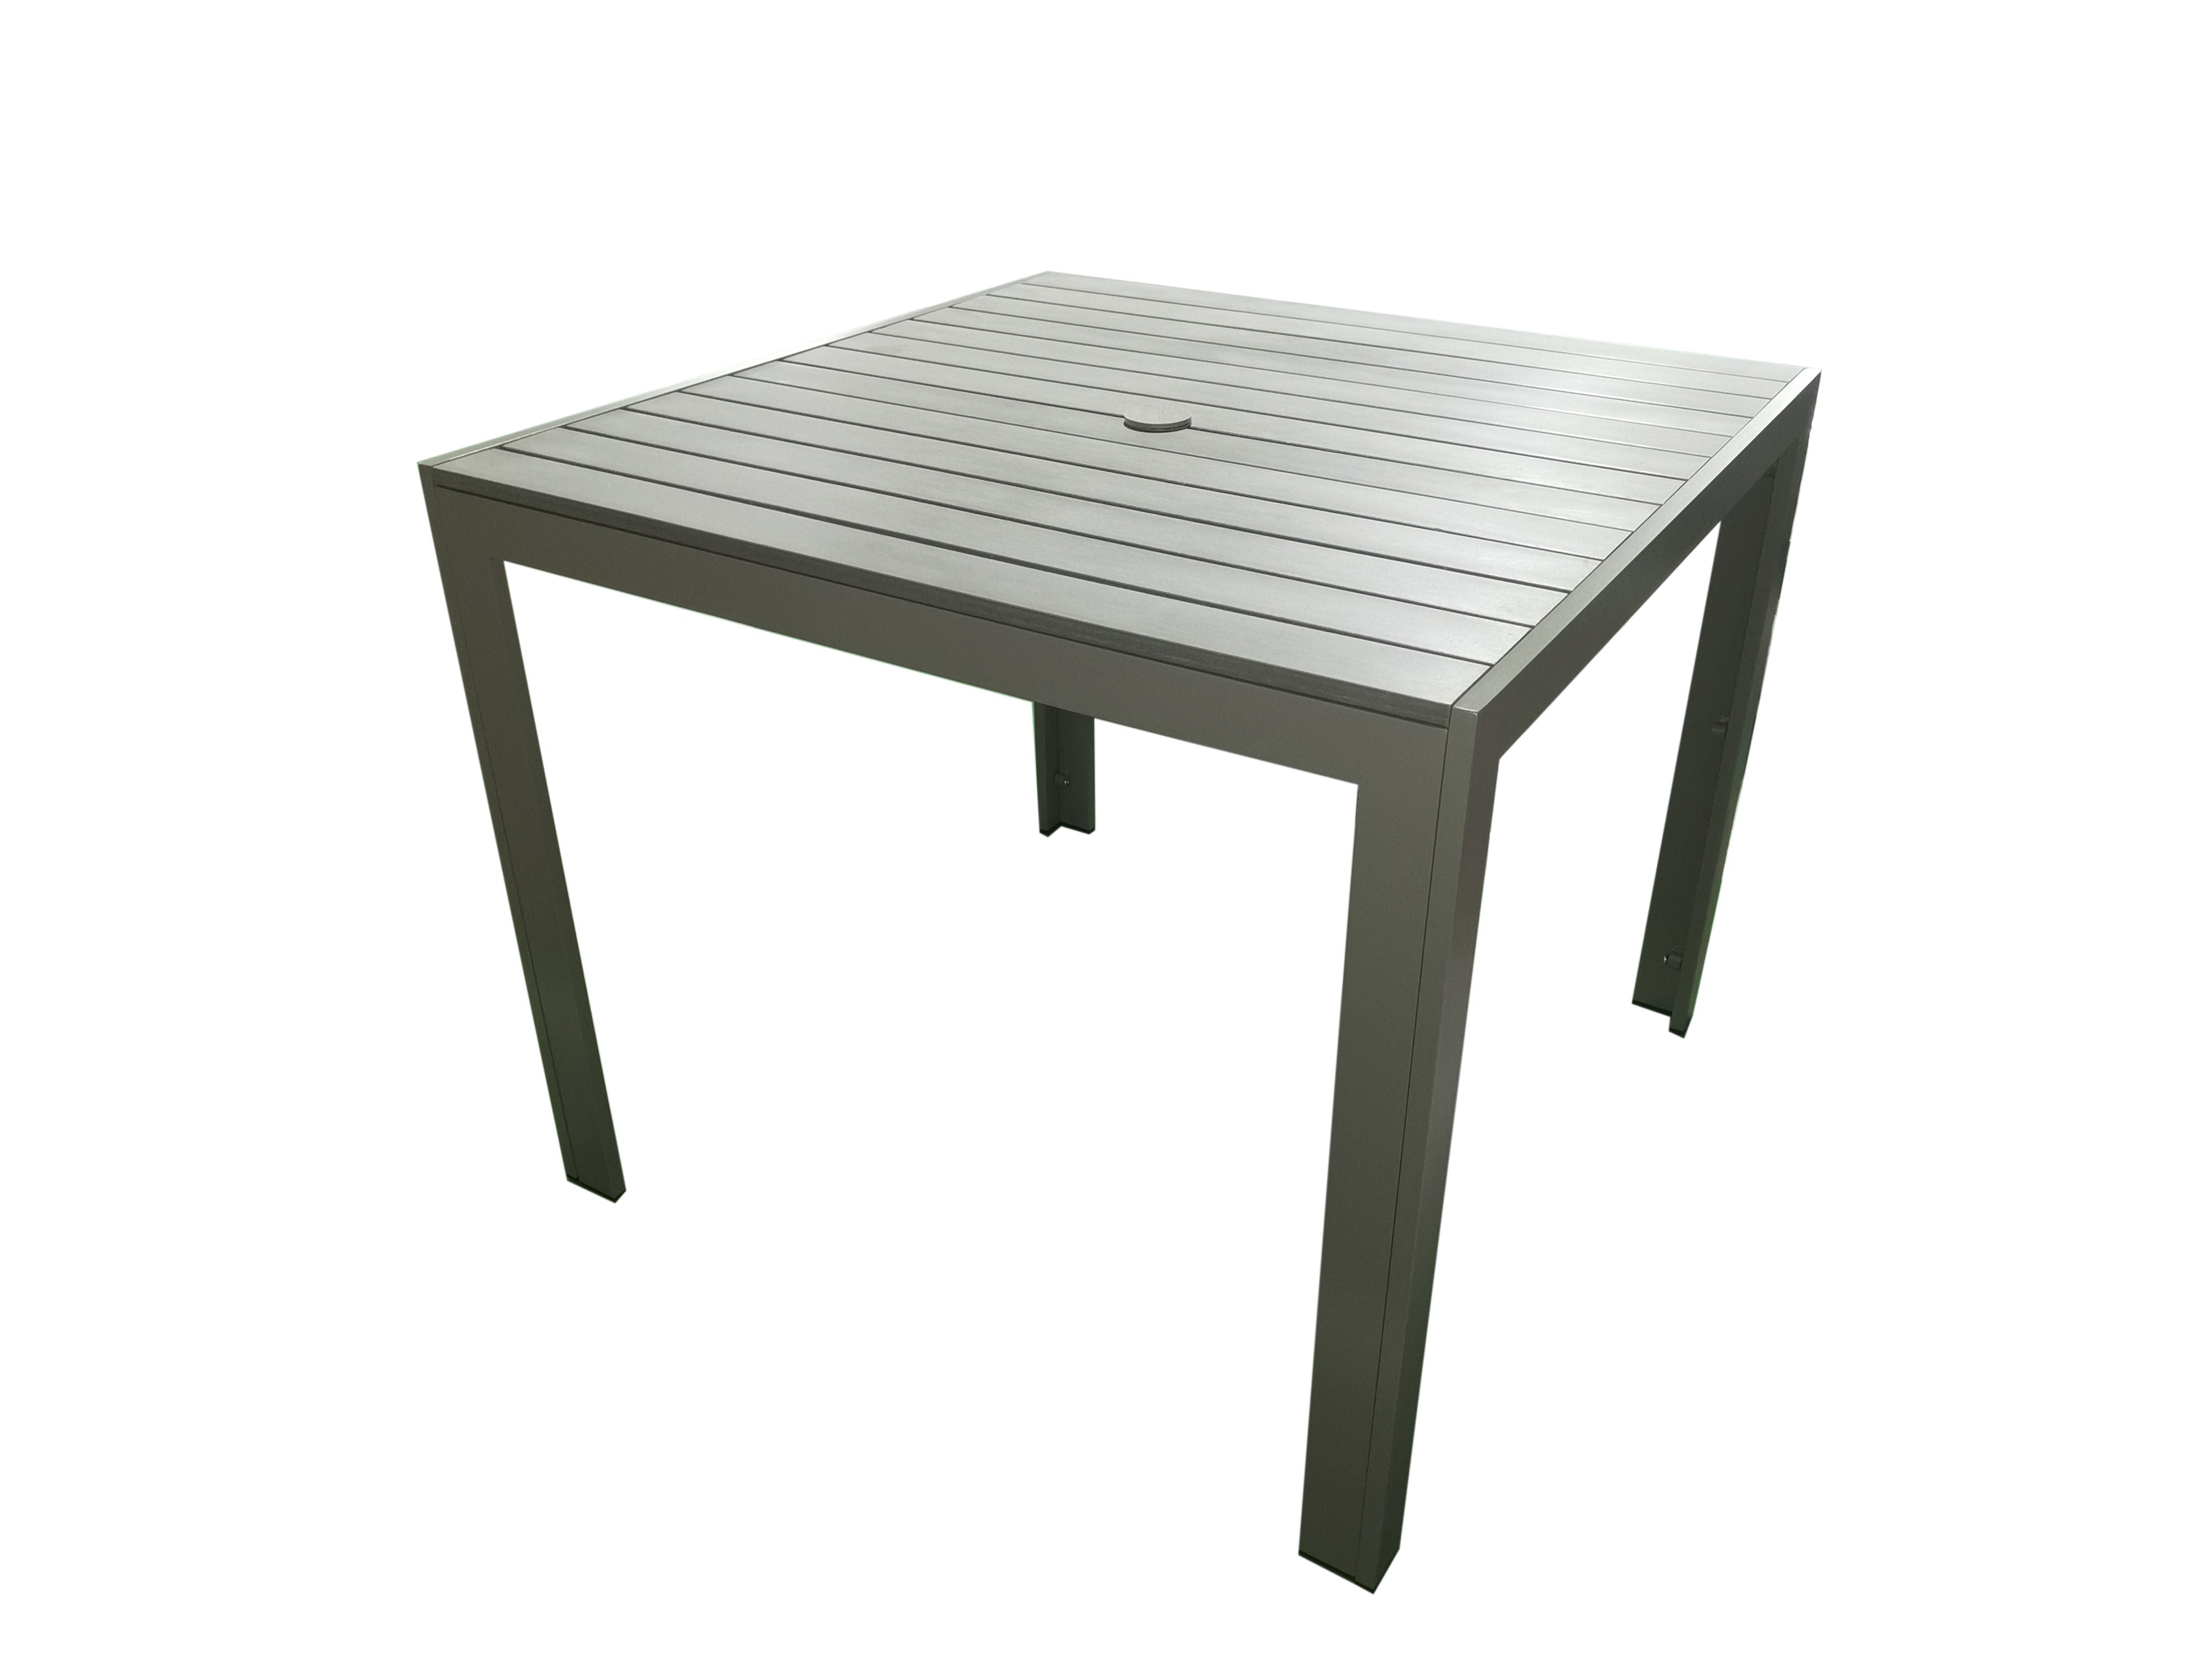 PatioZone Square Condo Table with Polywood Slats Tabletop w/ Umbrella Hole and Aluminum Frame (MOSS-T302T) - Matte Taupe